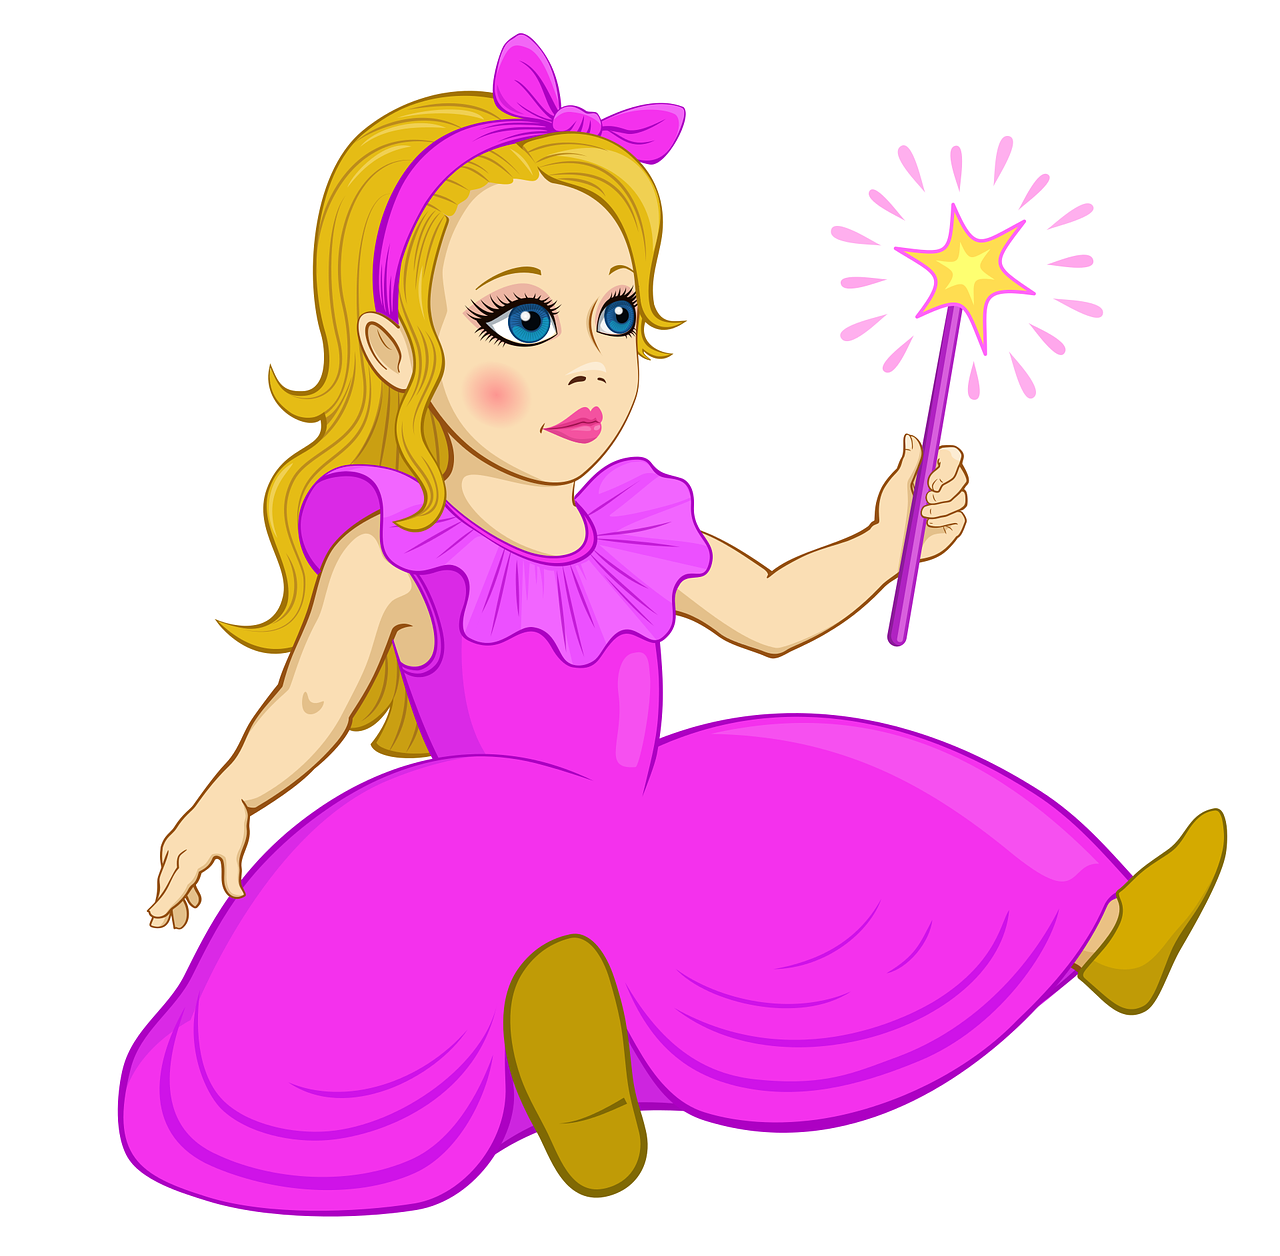 a little girl in a pink dress holding a magic wand, conceptual art, cartoon style illustration, princess of amethyst, very artistic pose, seven pointed pink star